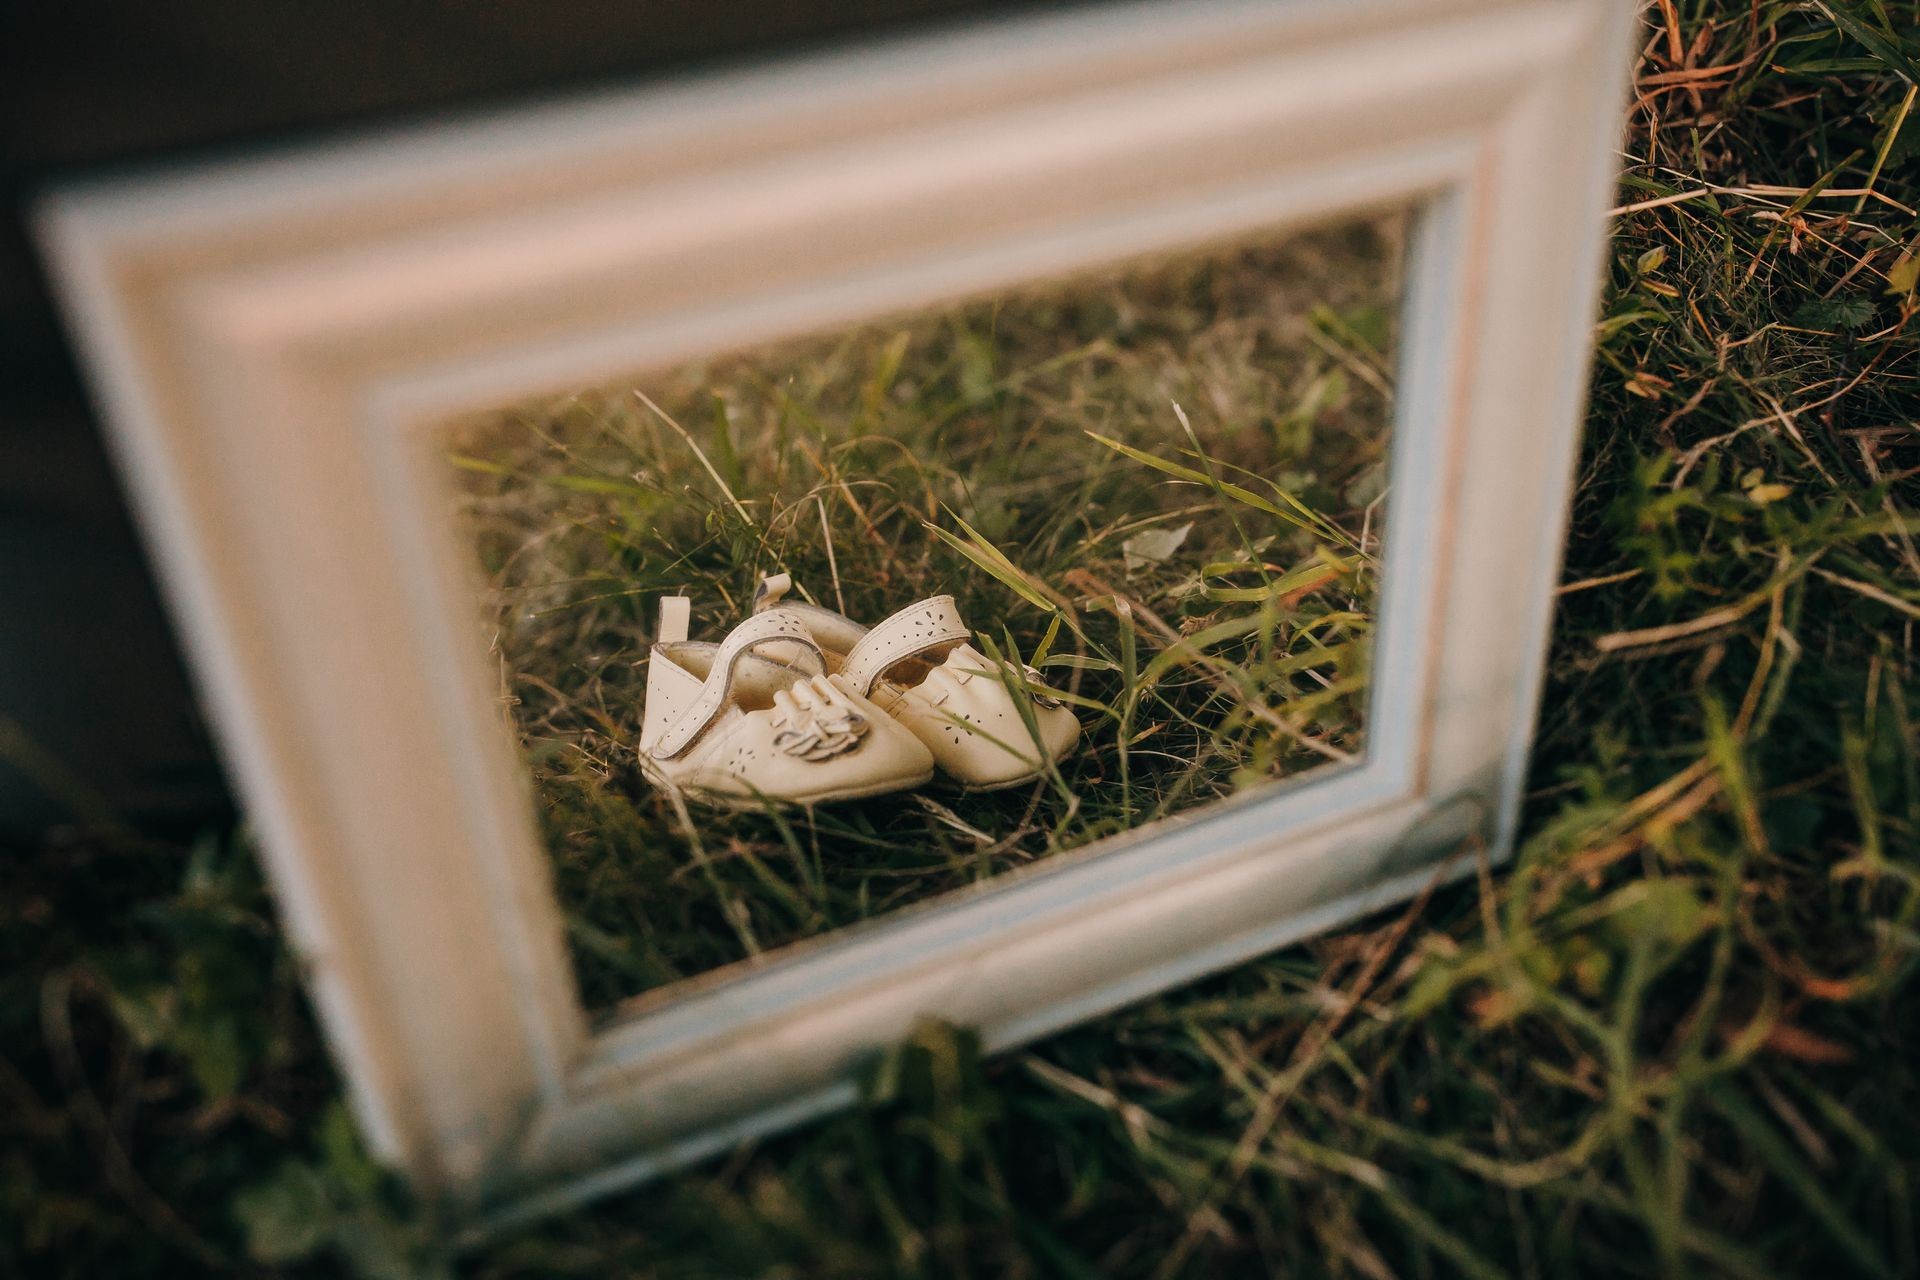 Baby shoes in frame for photo in sunset